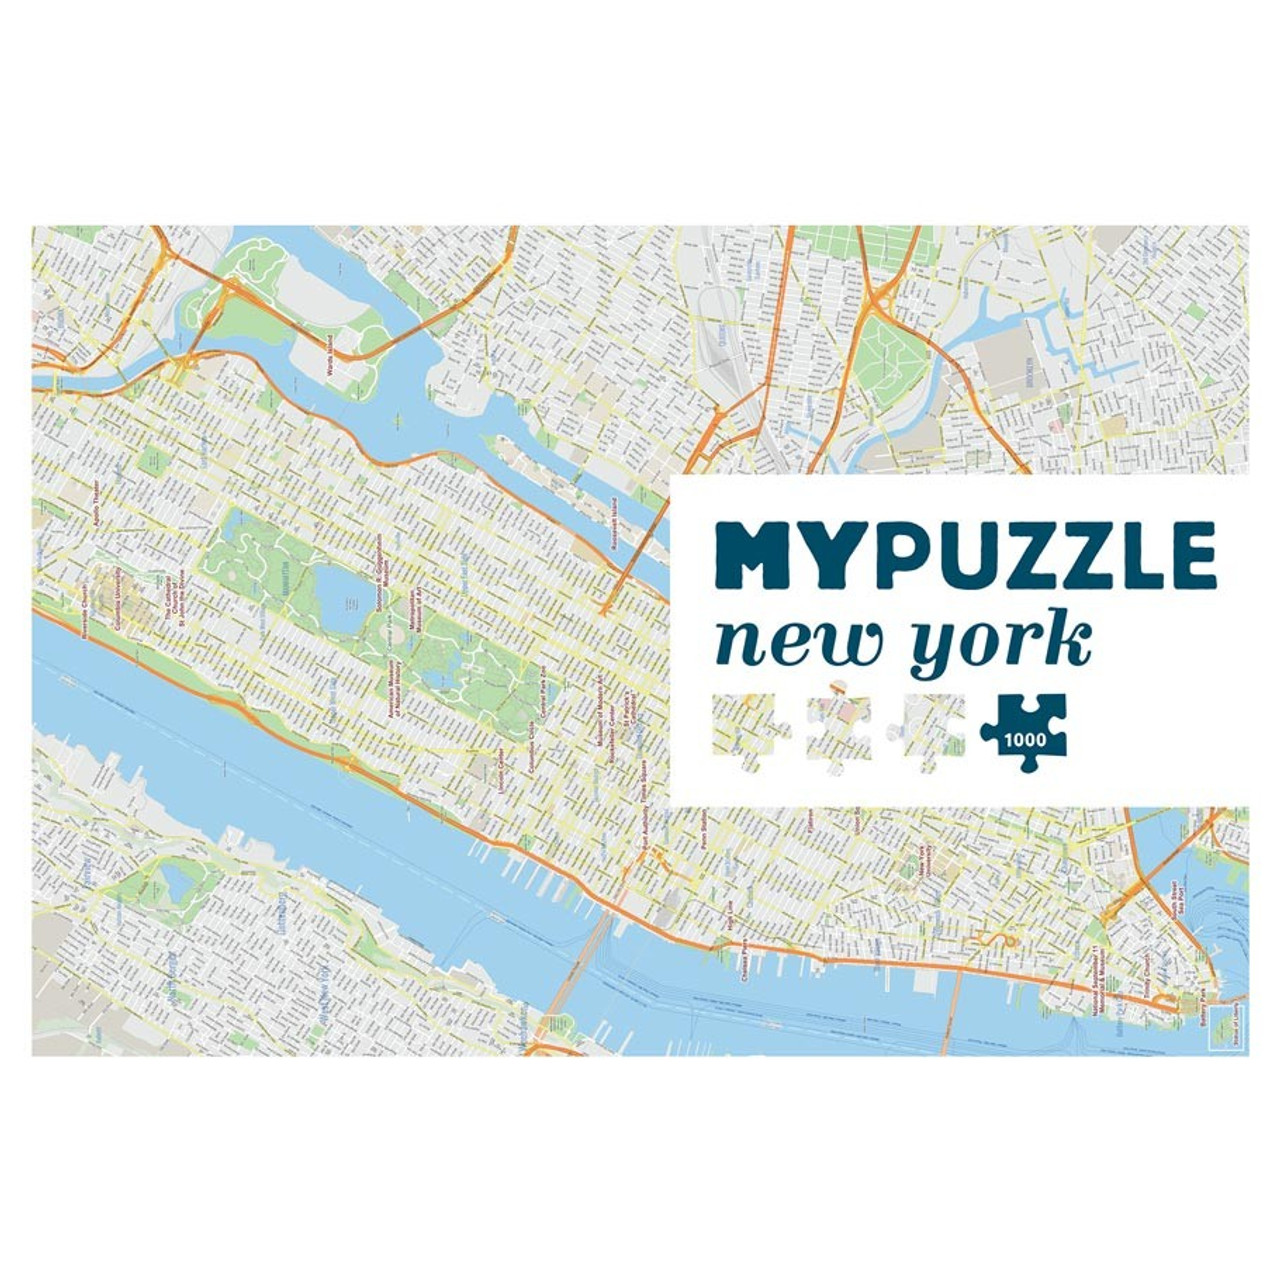 Puzzle Welcome to New York, 1 000 pieces